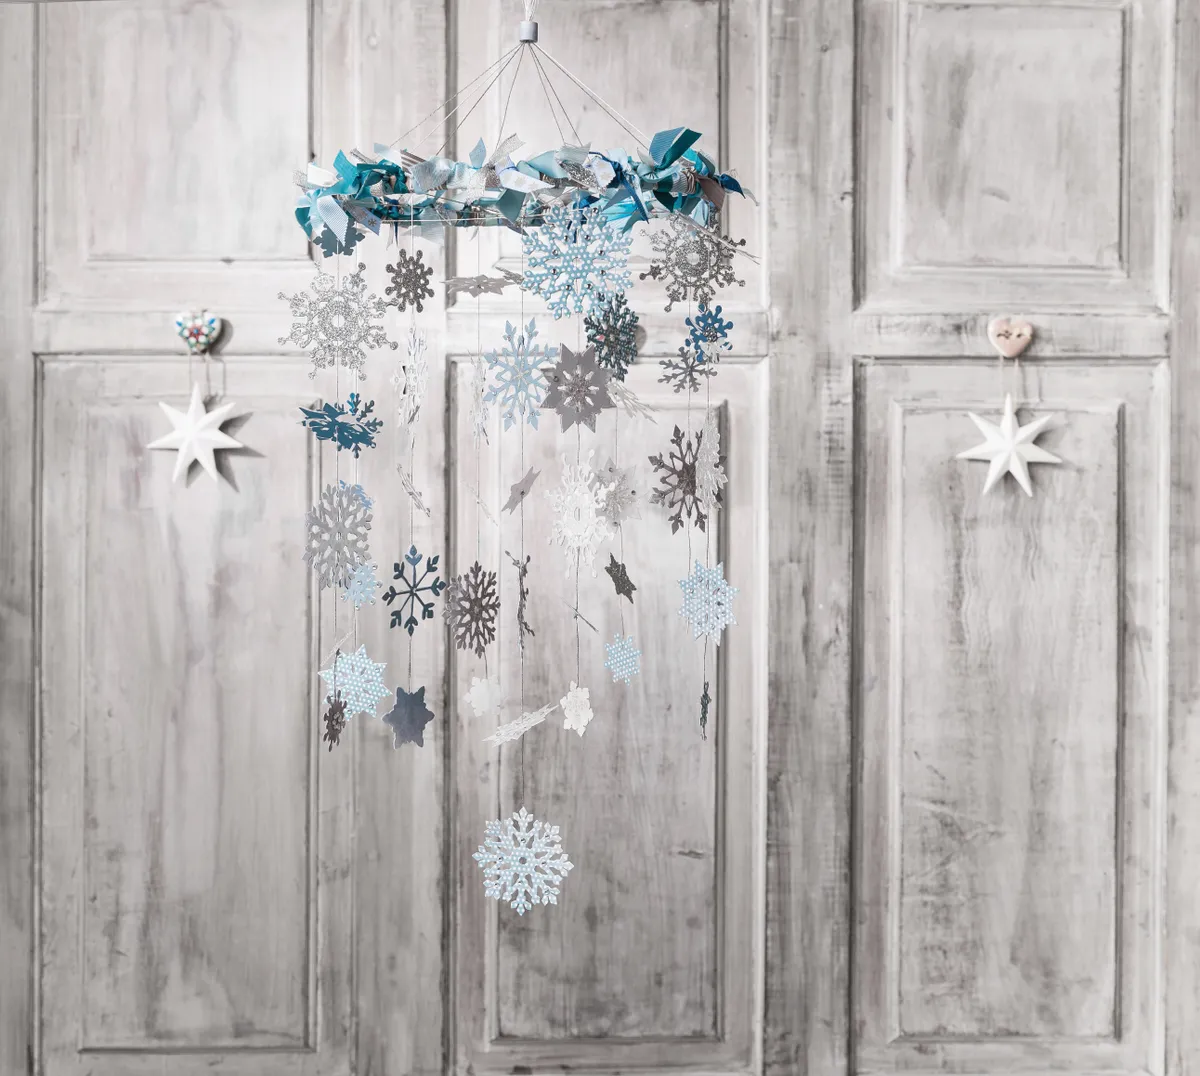 How to make a snowflake mobile - finished piece